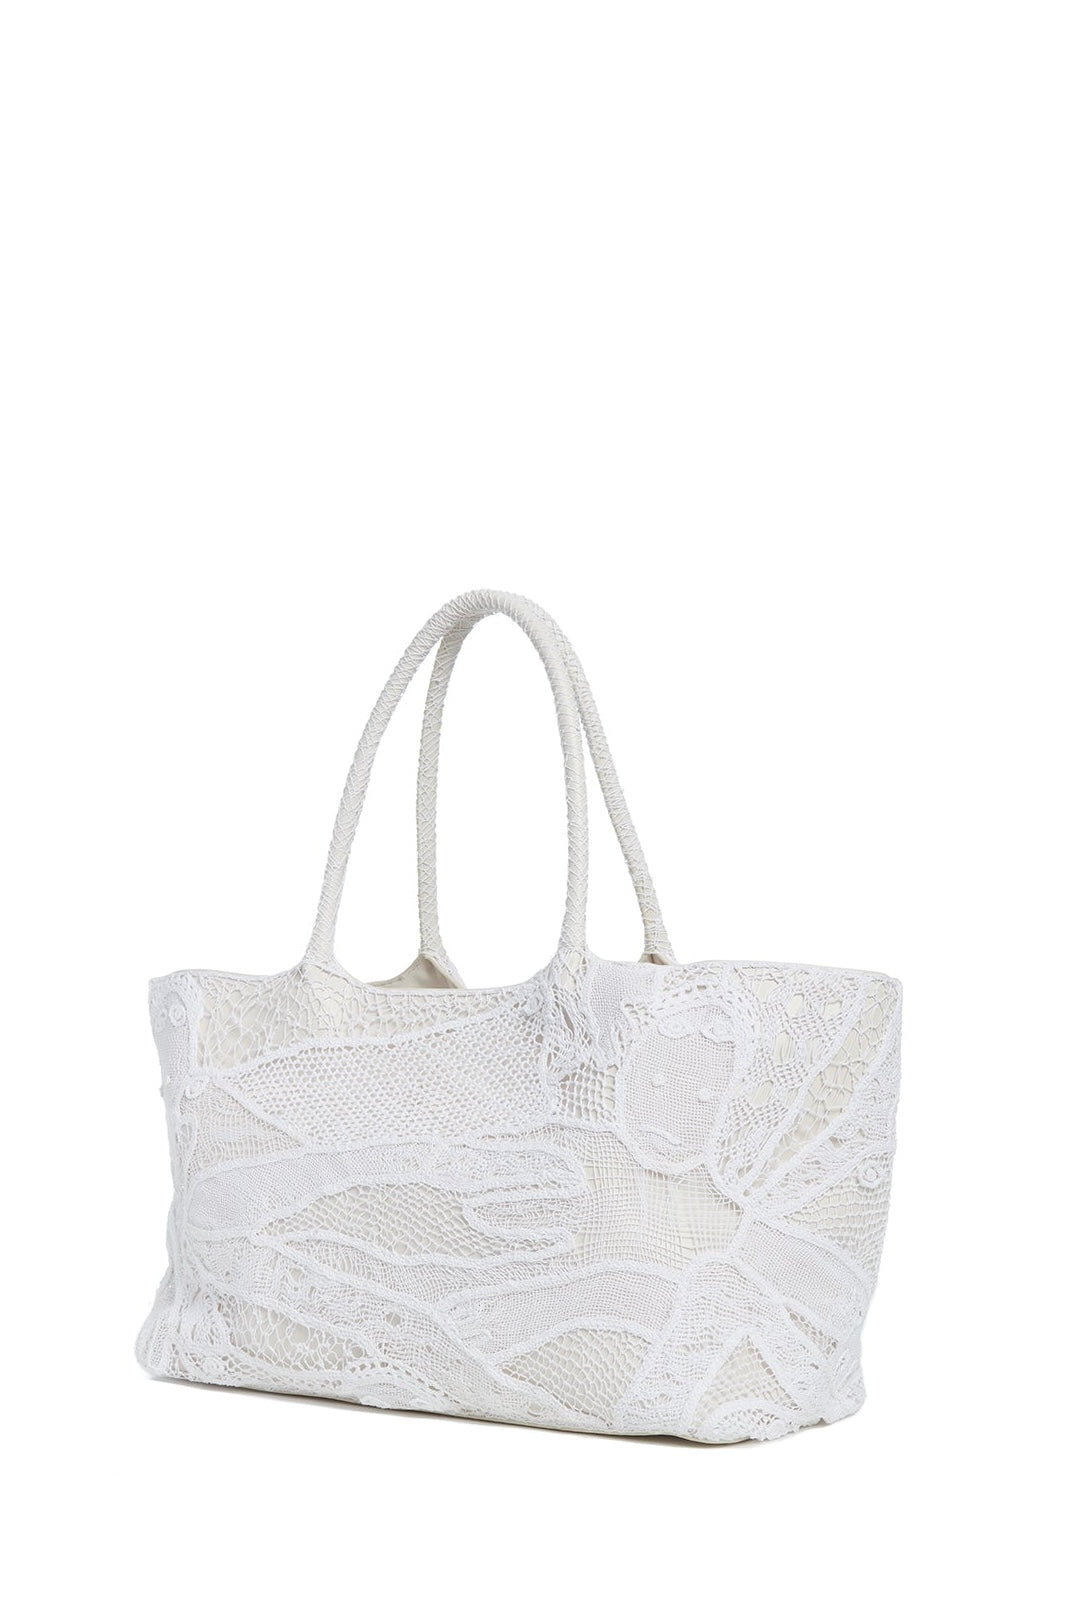 Mcewan Tote Bag in Ivory Leather with Cotton Macrame